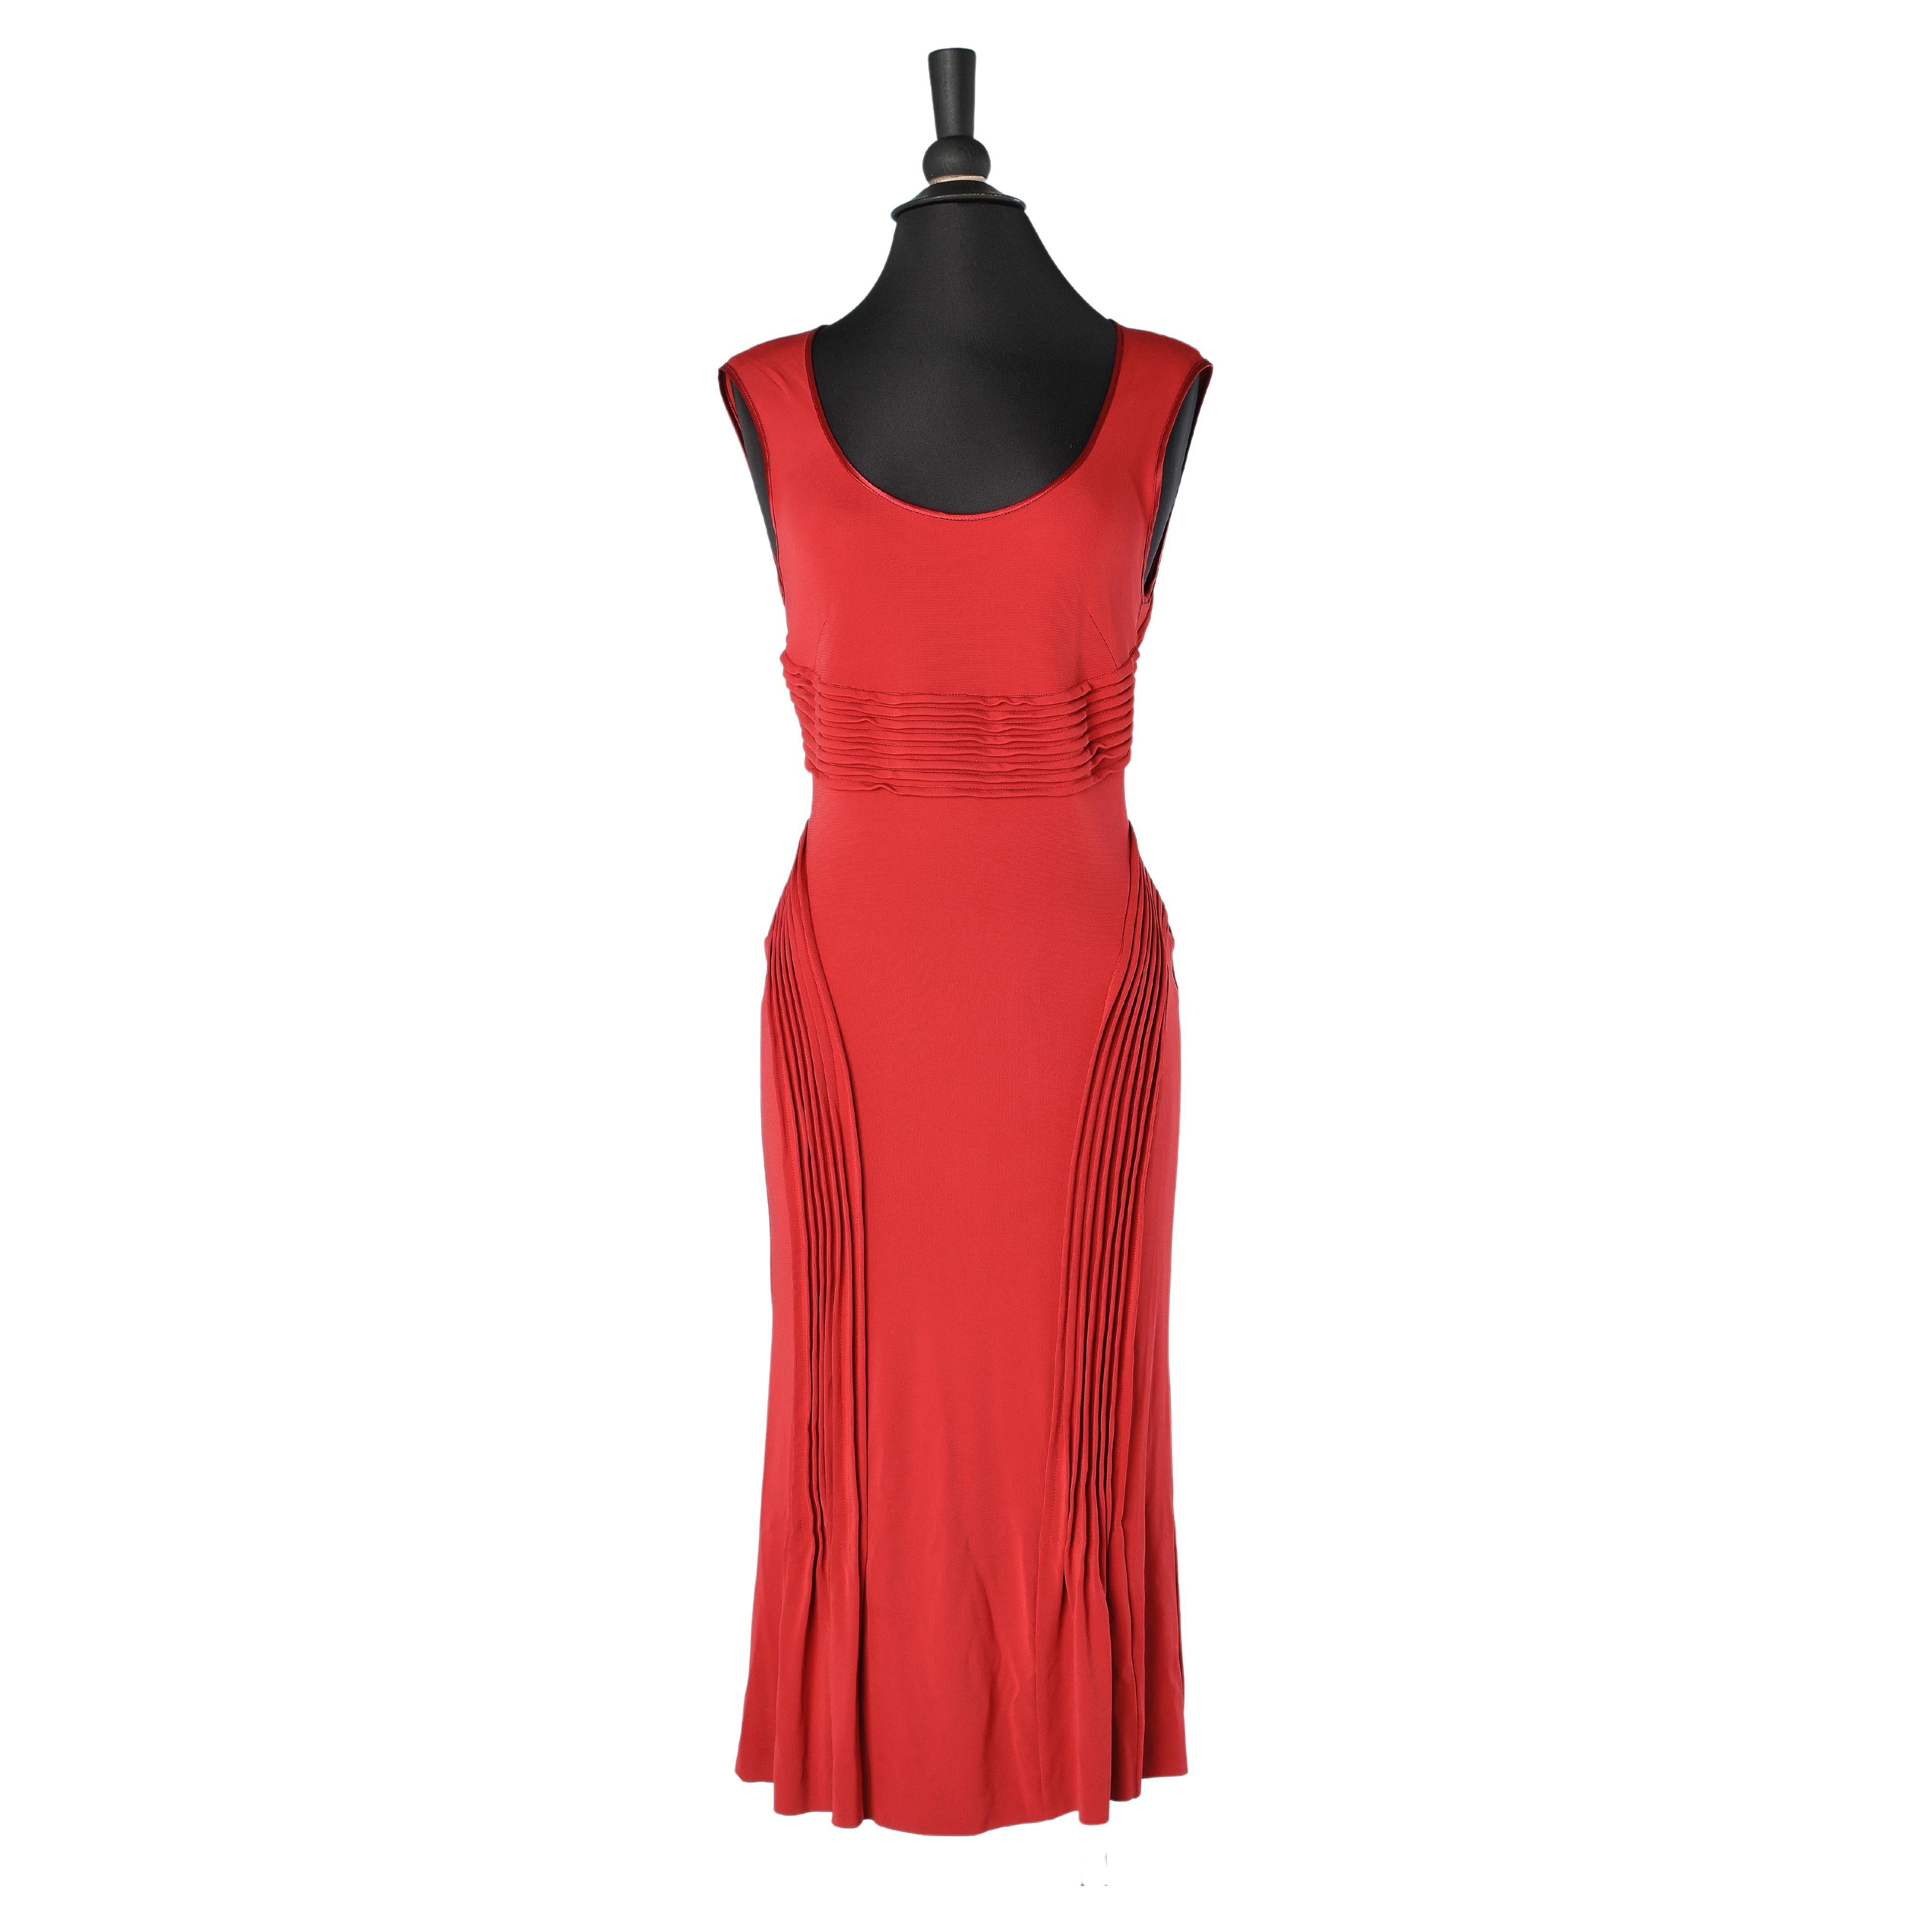 Red  sleeveless jersey top-stitched cocktail dress Ferré NEW 